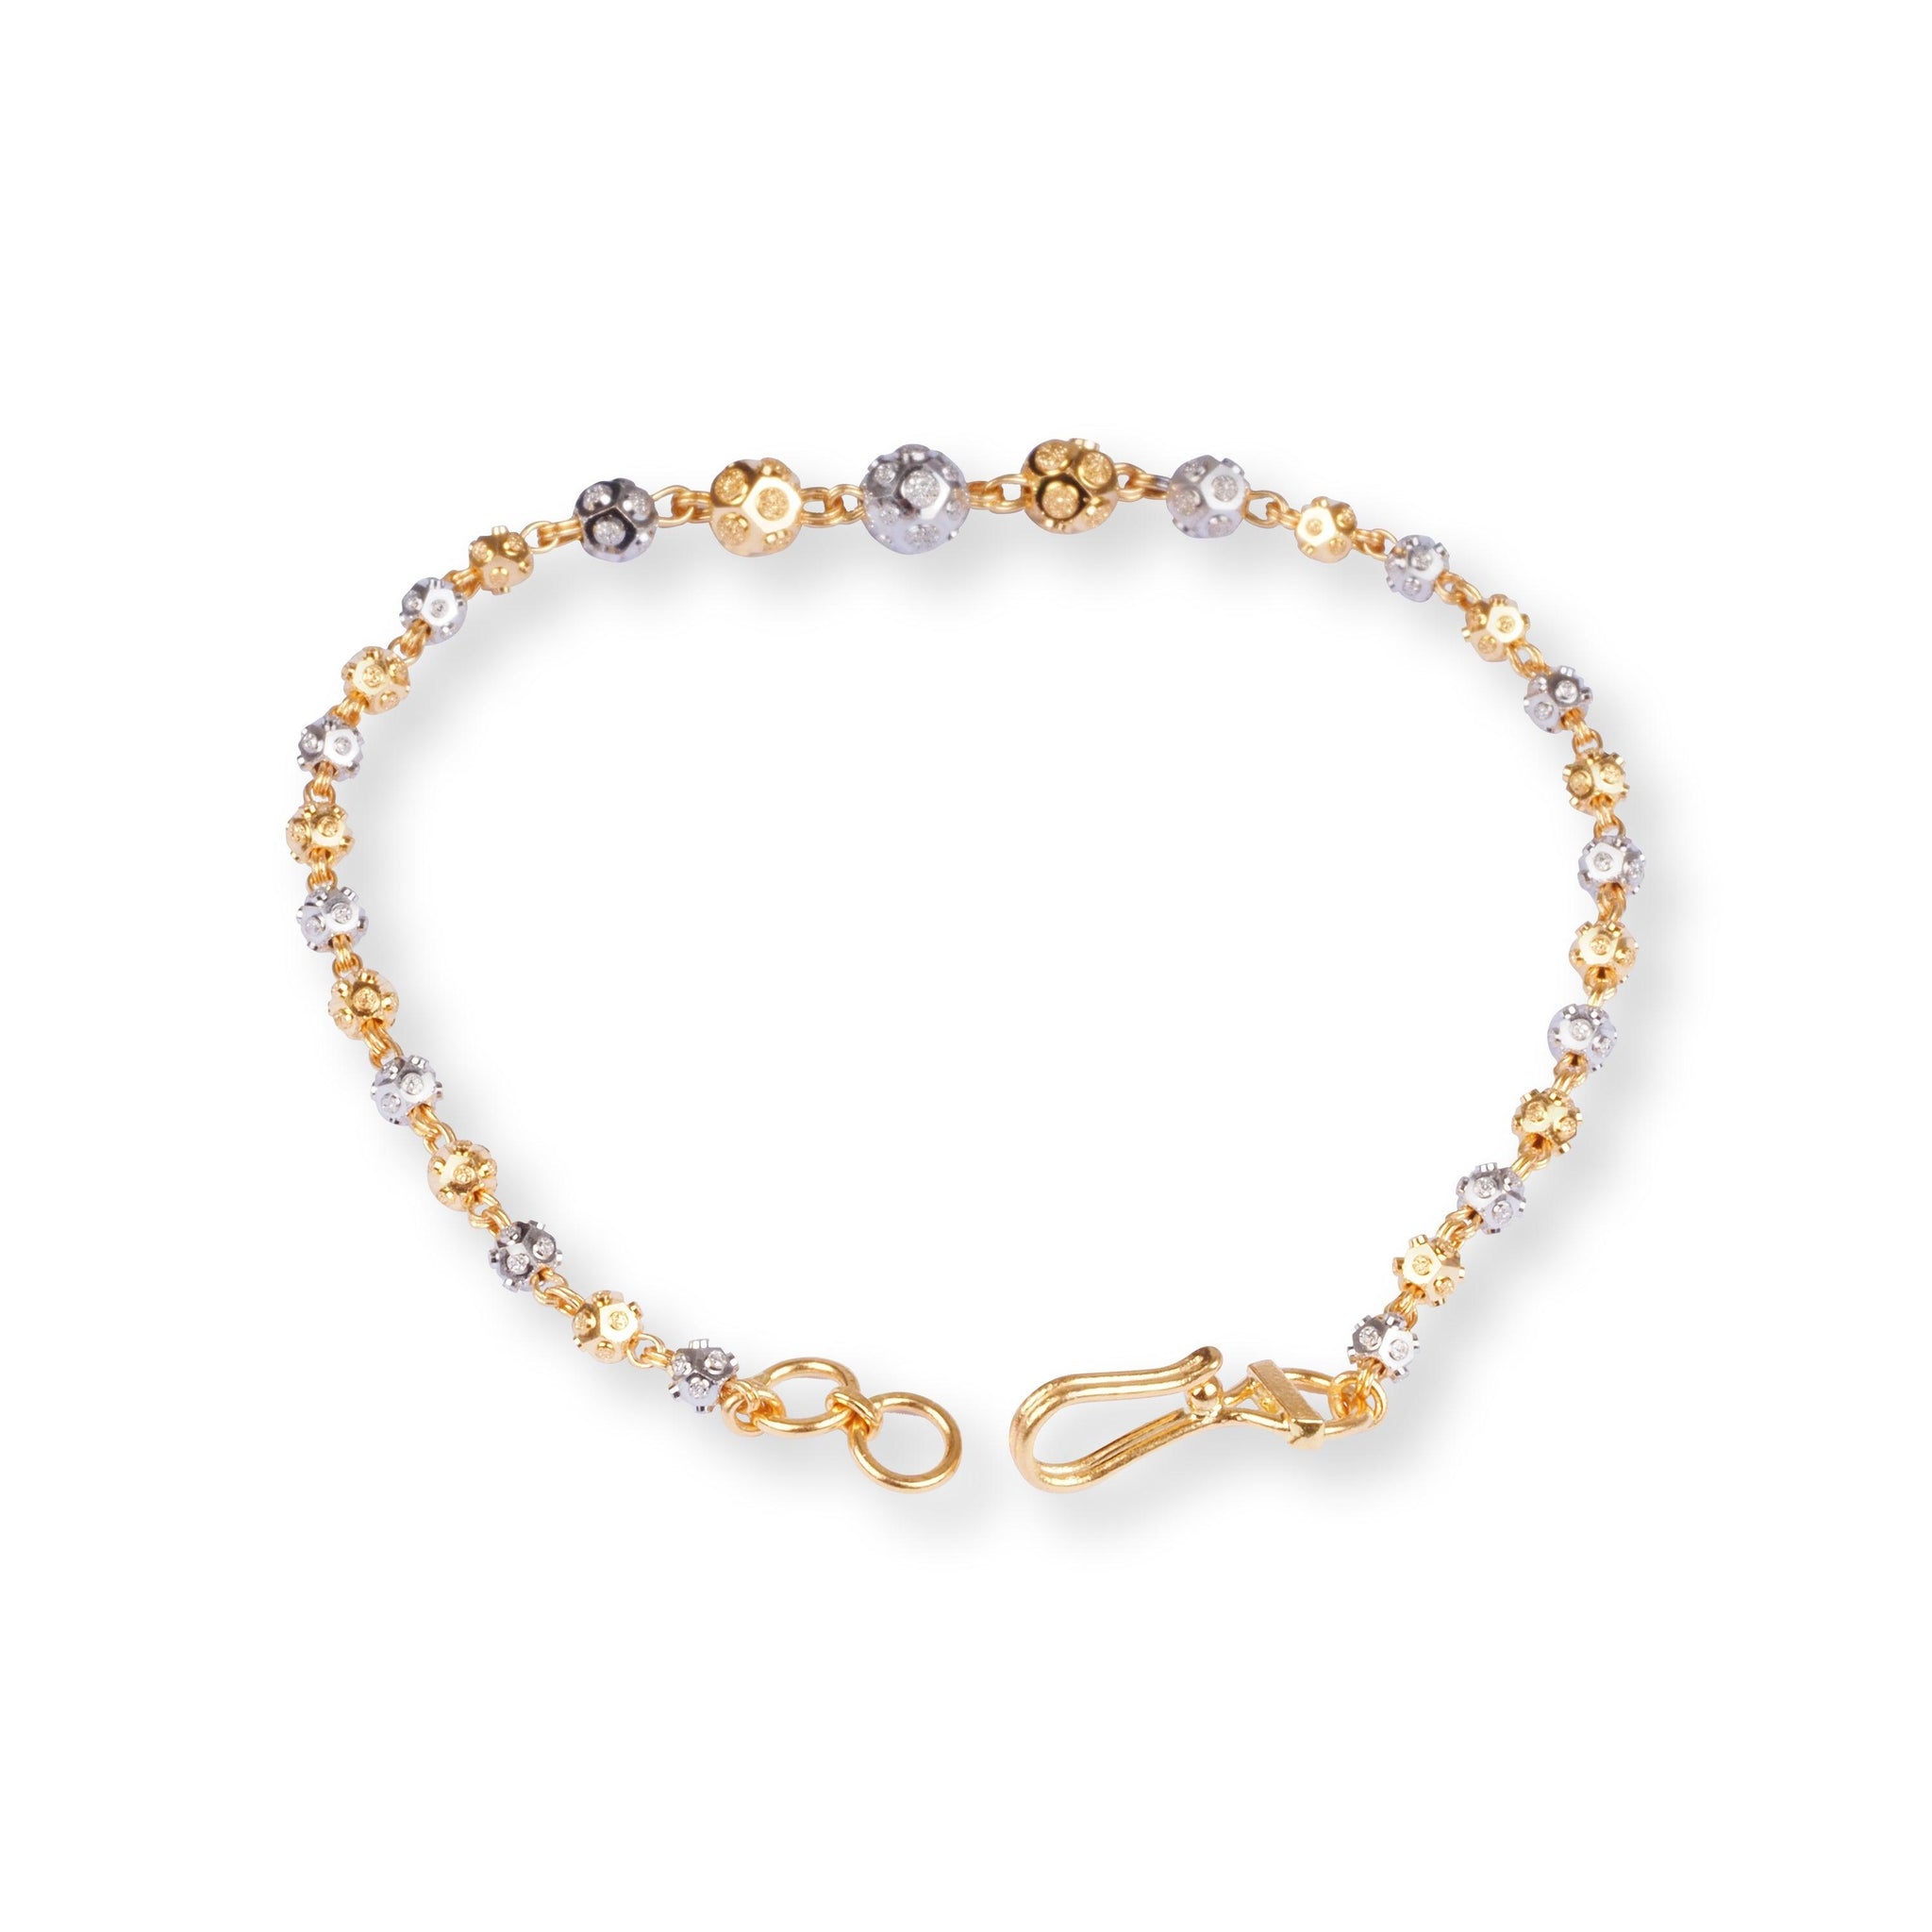 22ct Gold Bracelet with Diamond Cut Beads in Rhodium Design and Hook Clasp LBR-8498